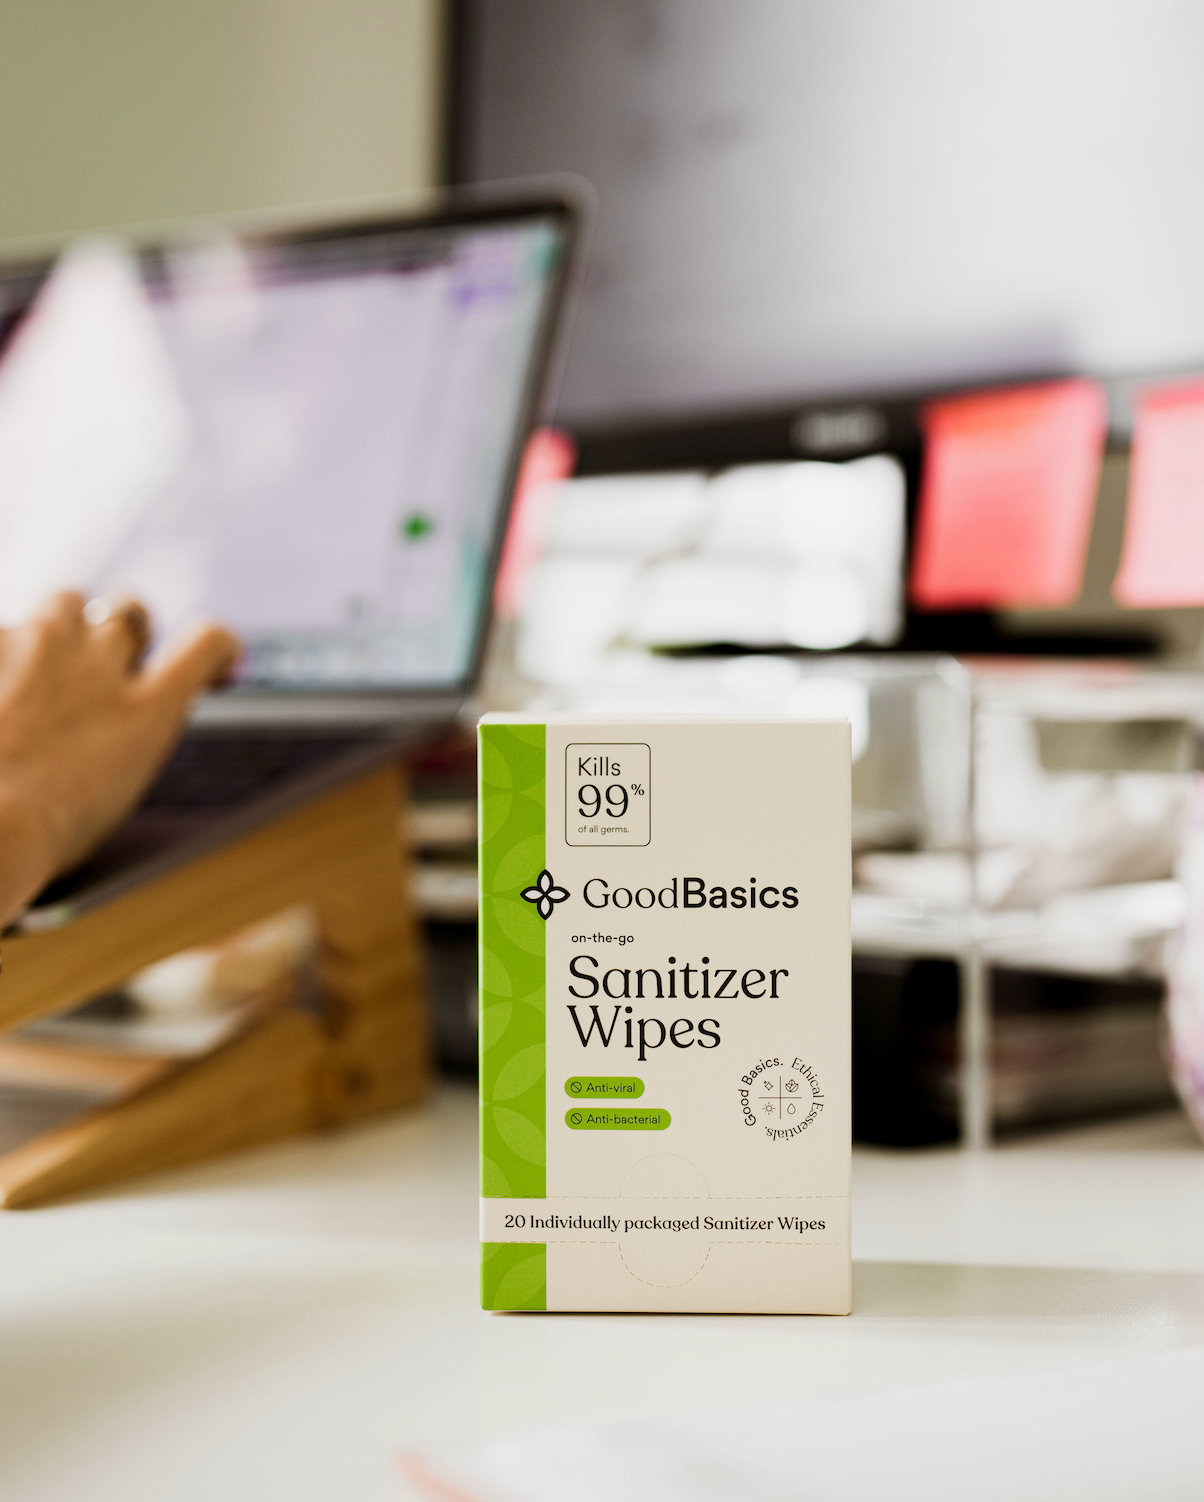 GoodBasics Power Your Fingertips: Sanitizer Wipes for Daily Use How GoodBasics Sanitizer Wipes make it easy to maintain cleanliness and safety